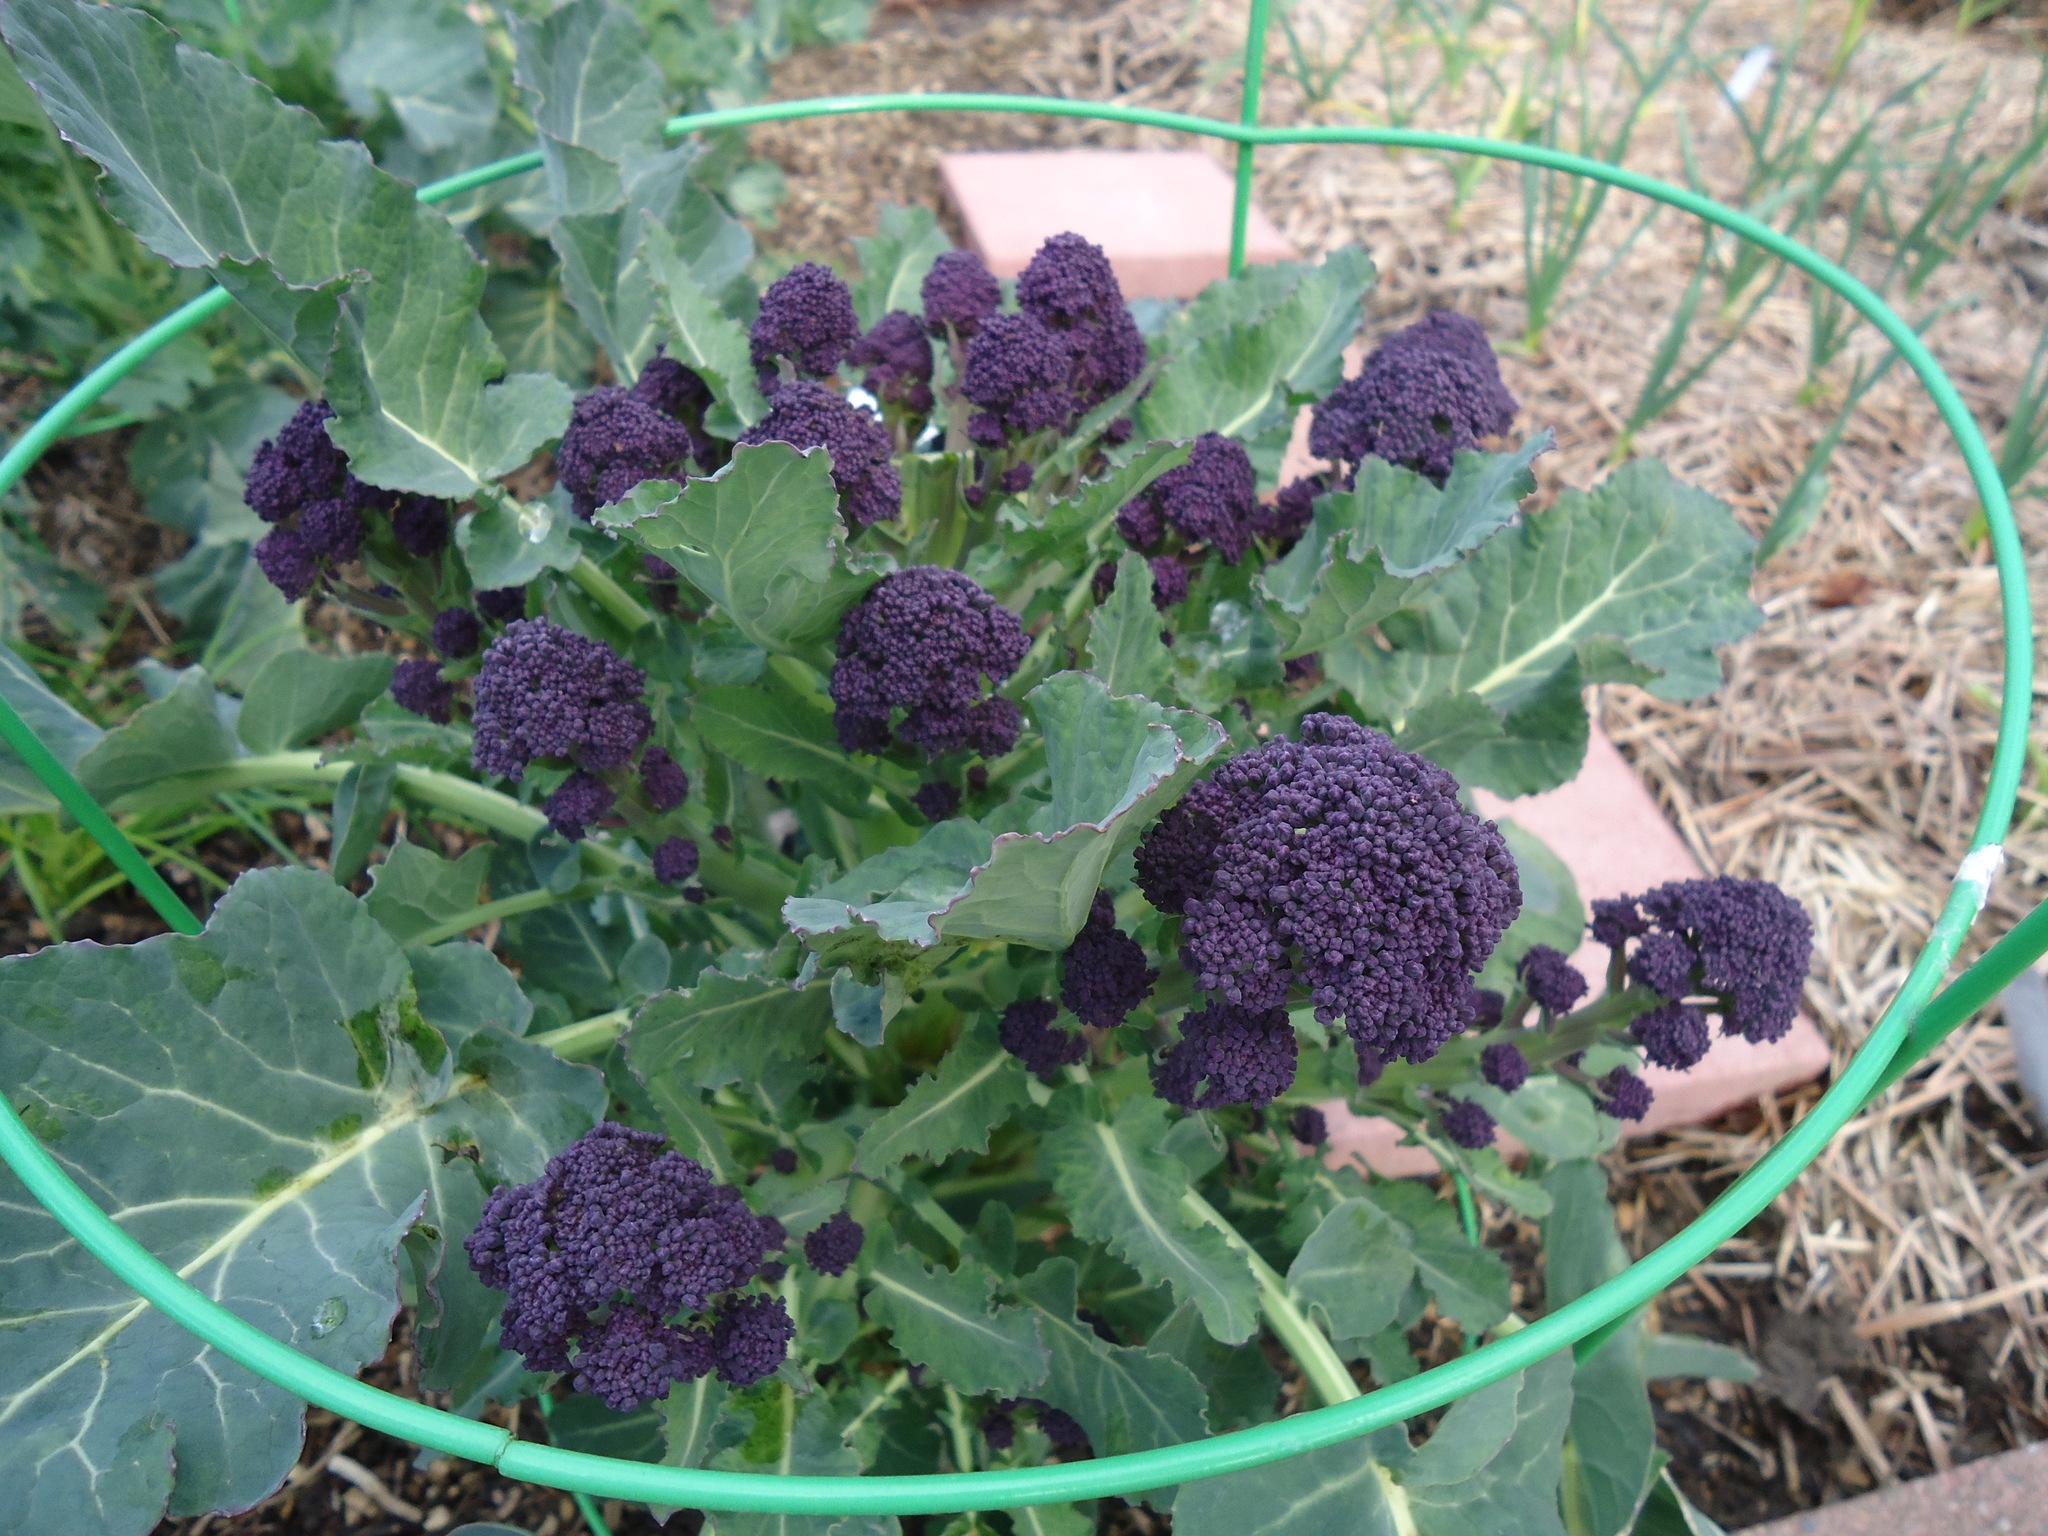 Sprouting broccoli is a large plant with multiple smaller heads branching off its main stalk. It is often planted in mid- to late summer and overwintered